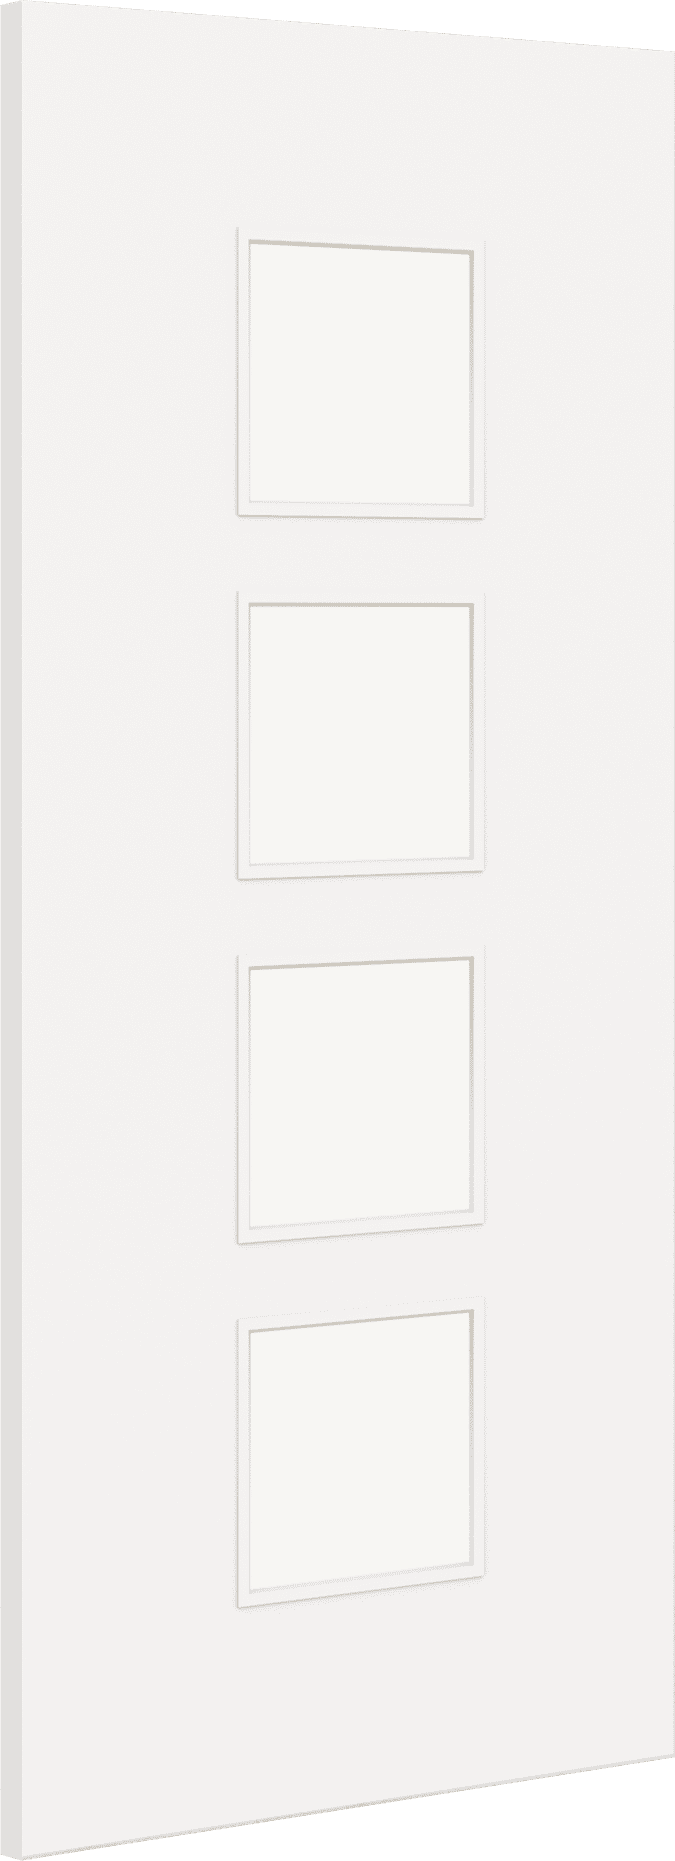 1981mm x 533mm x 44mm (21") Architectural Paint Grade White 09 Frosted Glazed Fire Door Blank